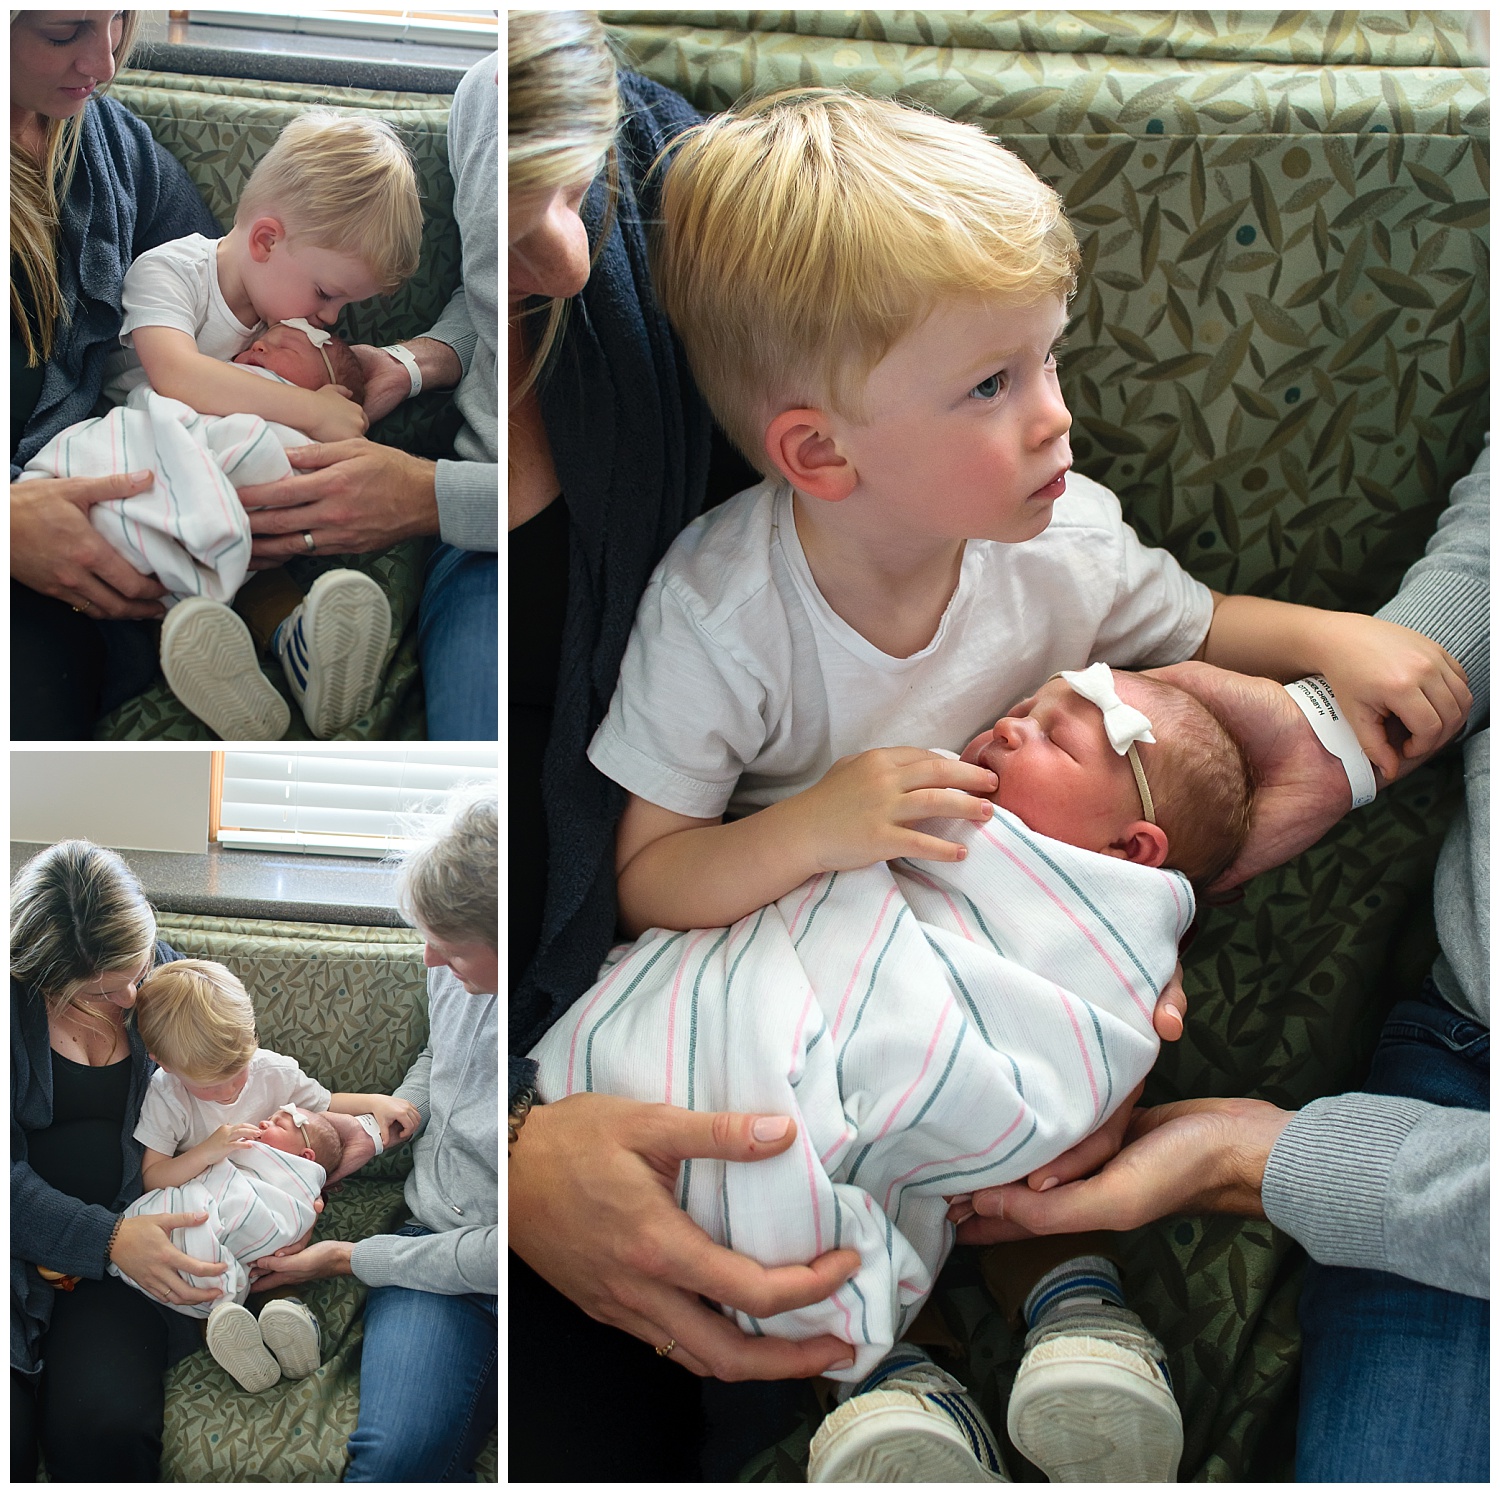 these are images of a toddler brother welcoming his new baby sister and holding and kissing her on the face as he holds his baby sister